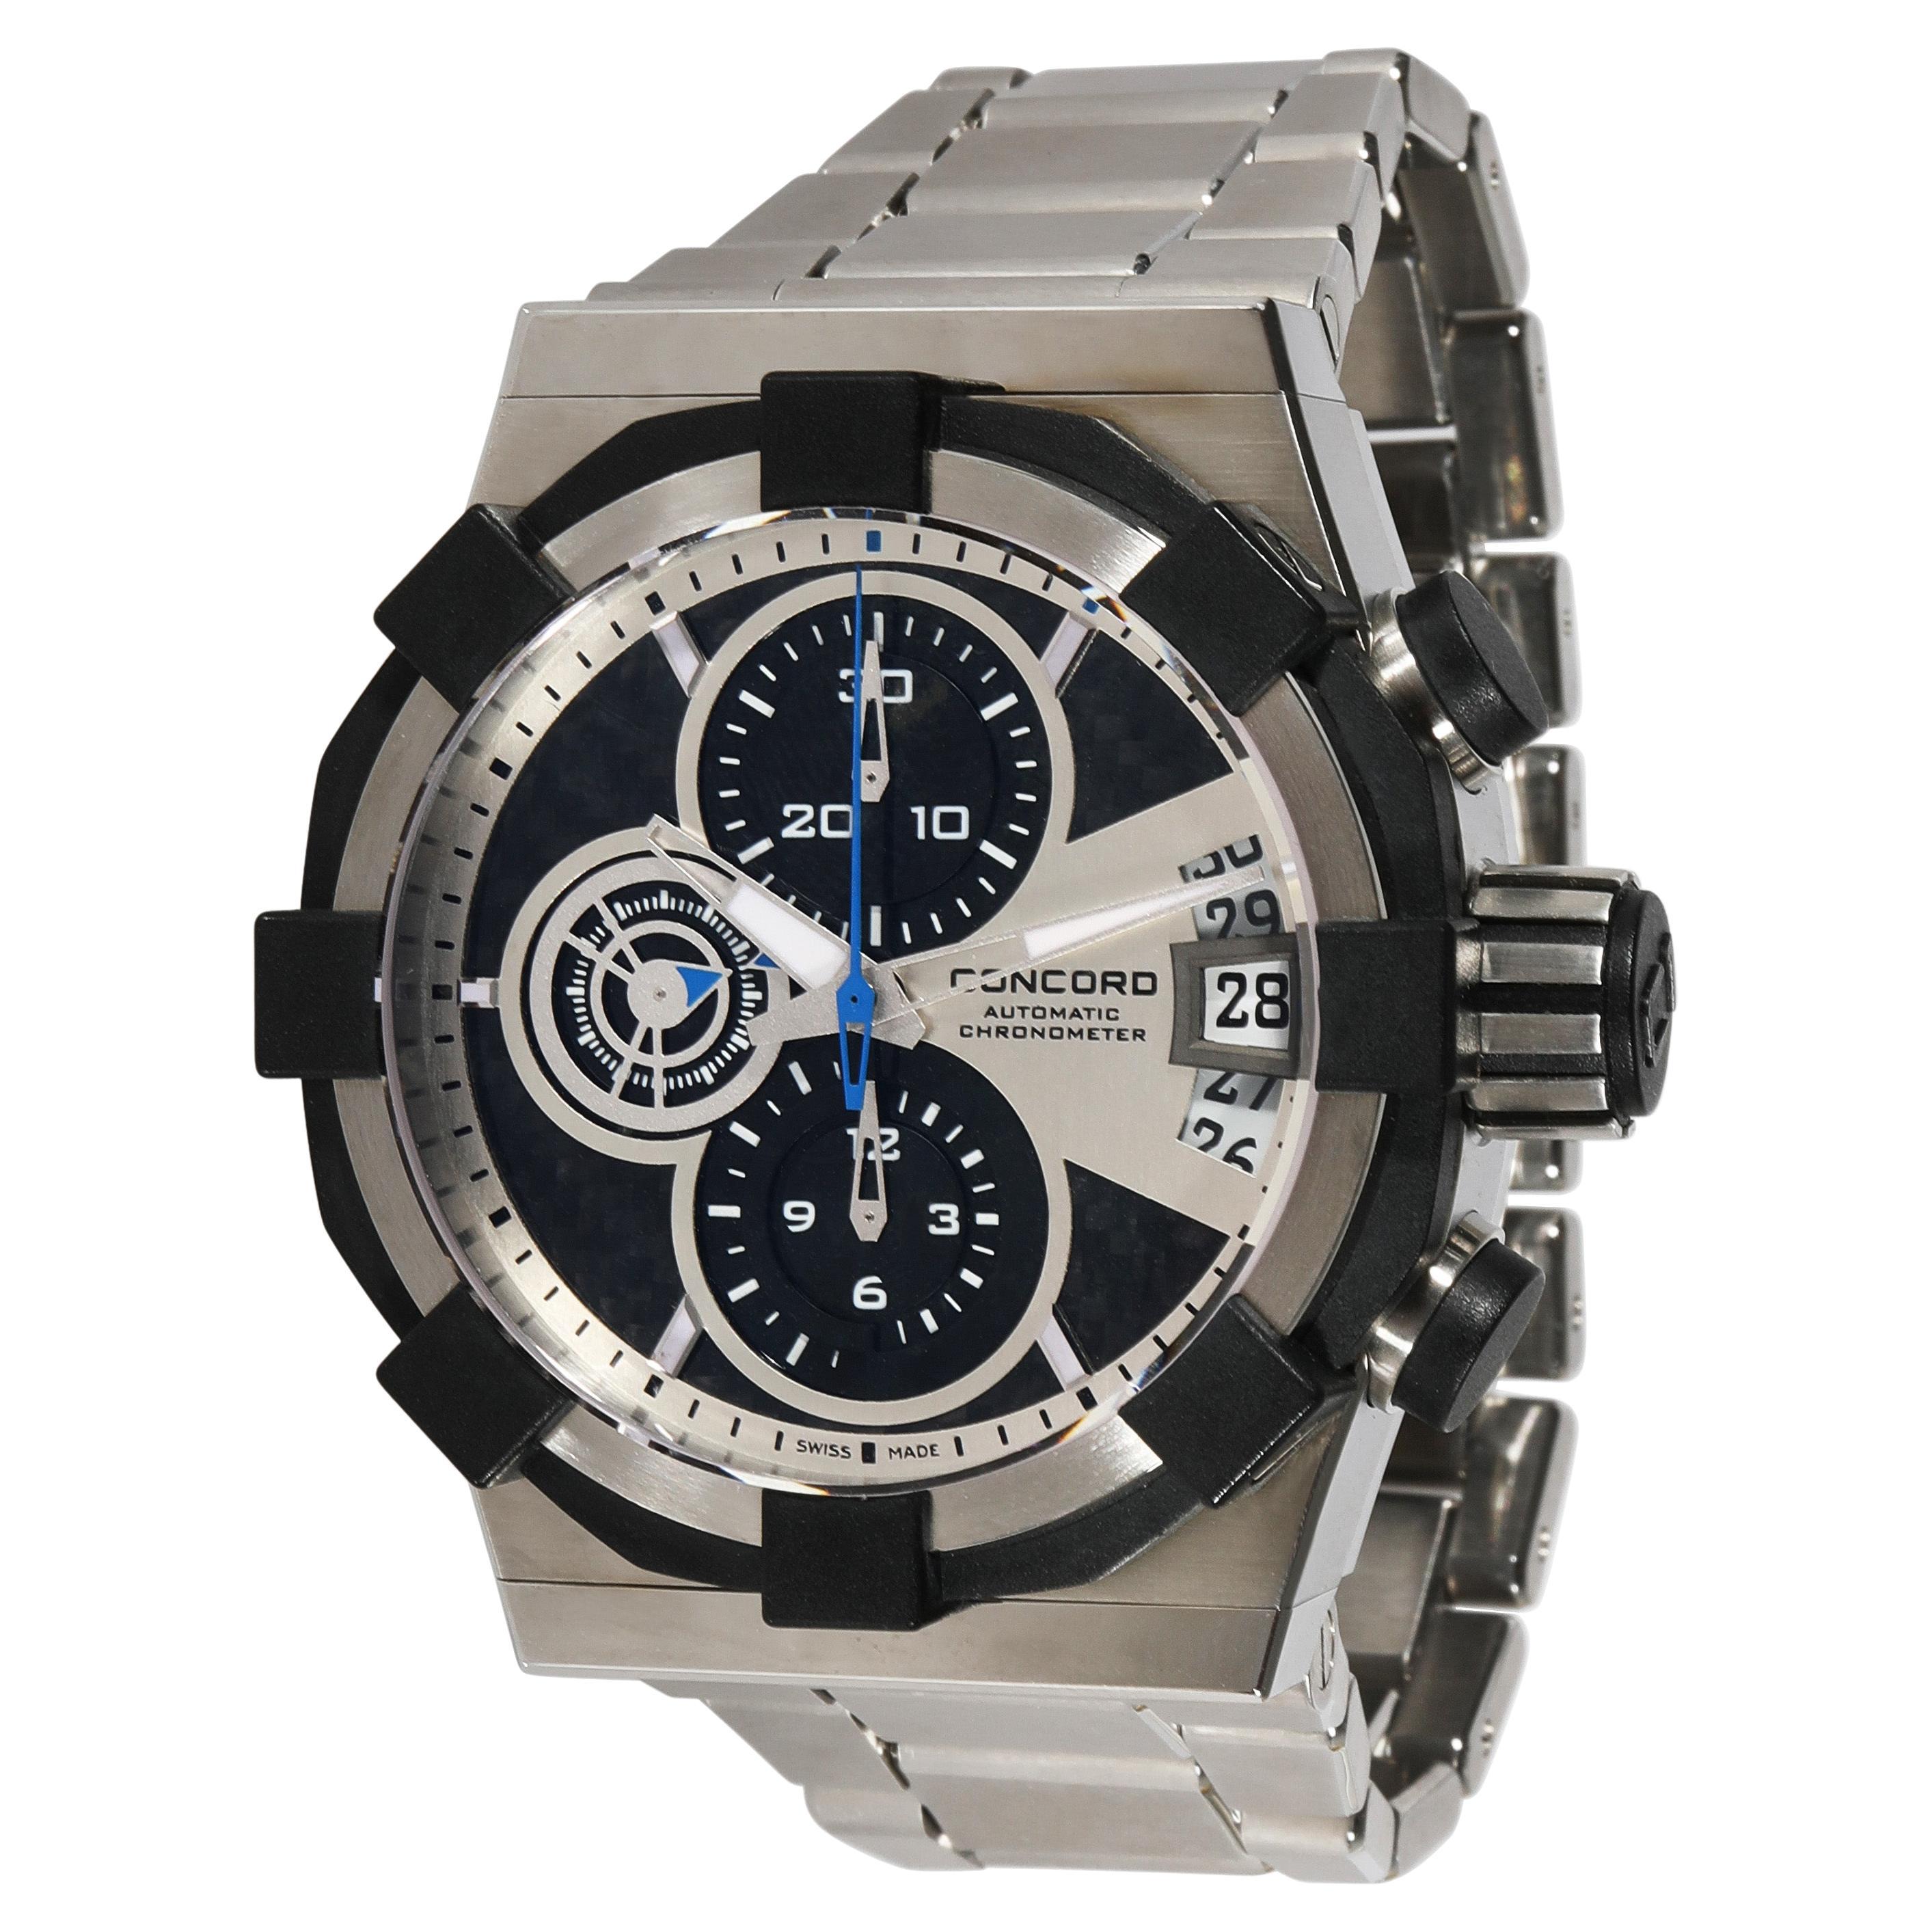 Concord C1 Chronograph 0320003 Men's Watch in Stainless Steel